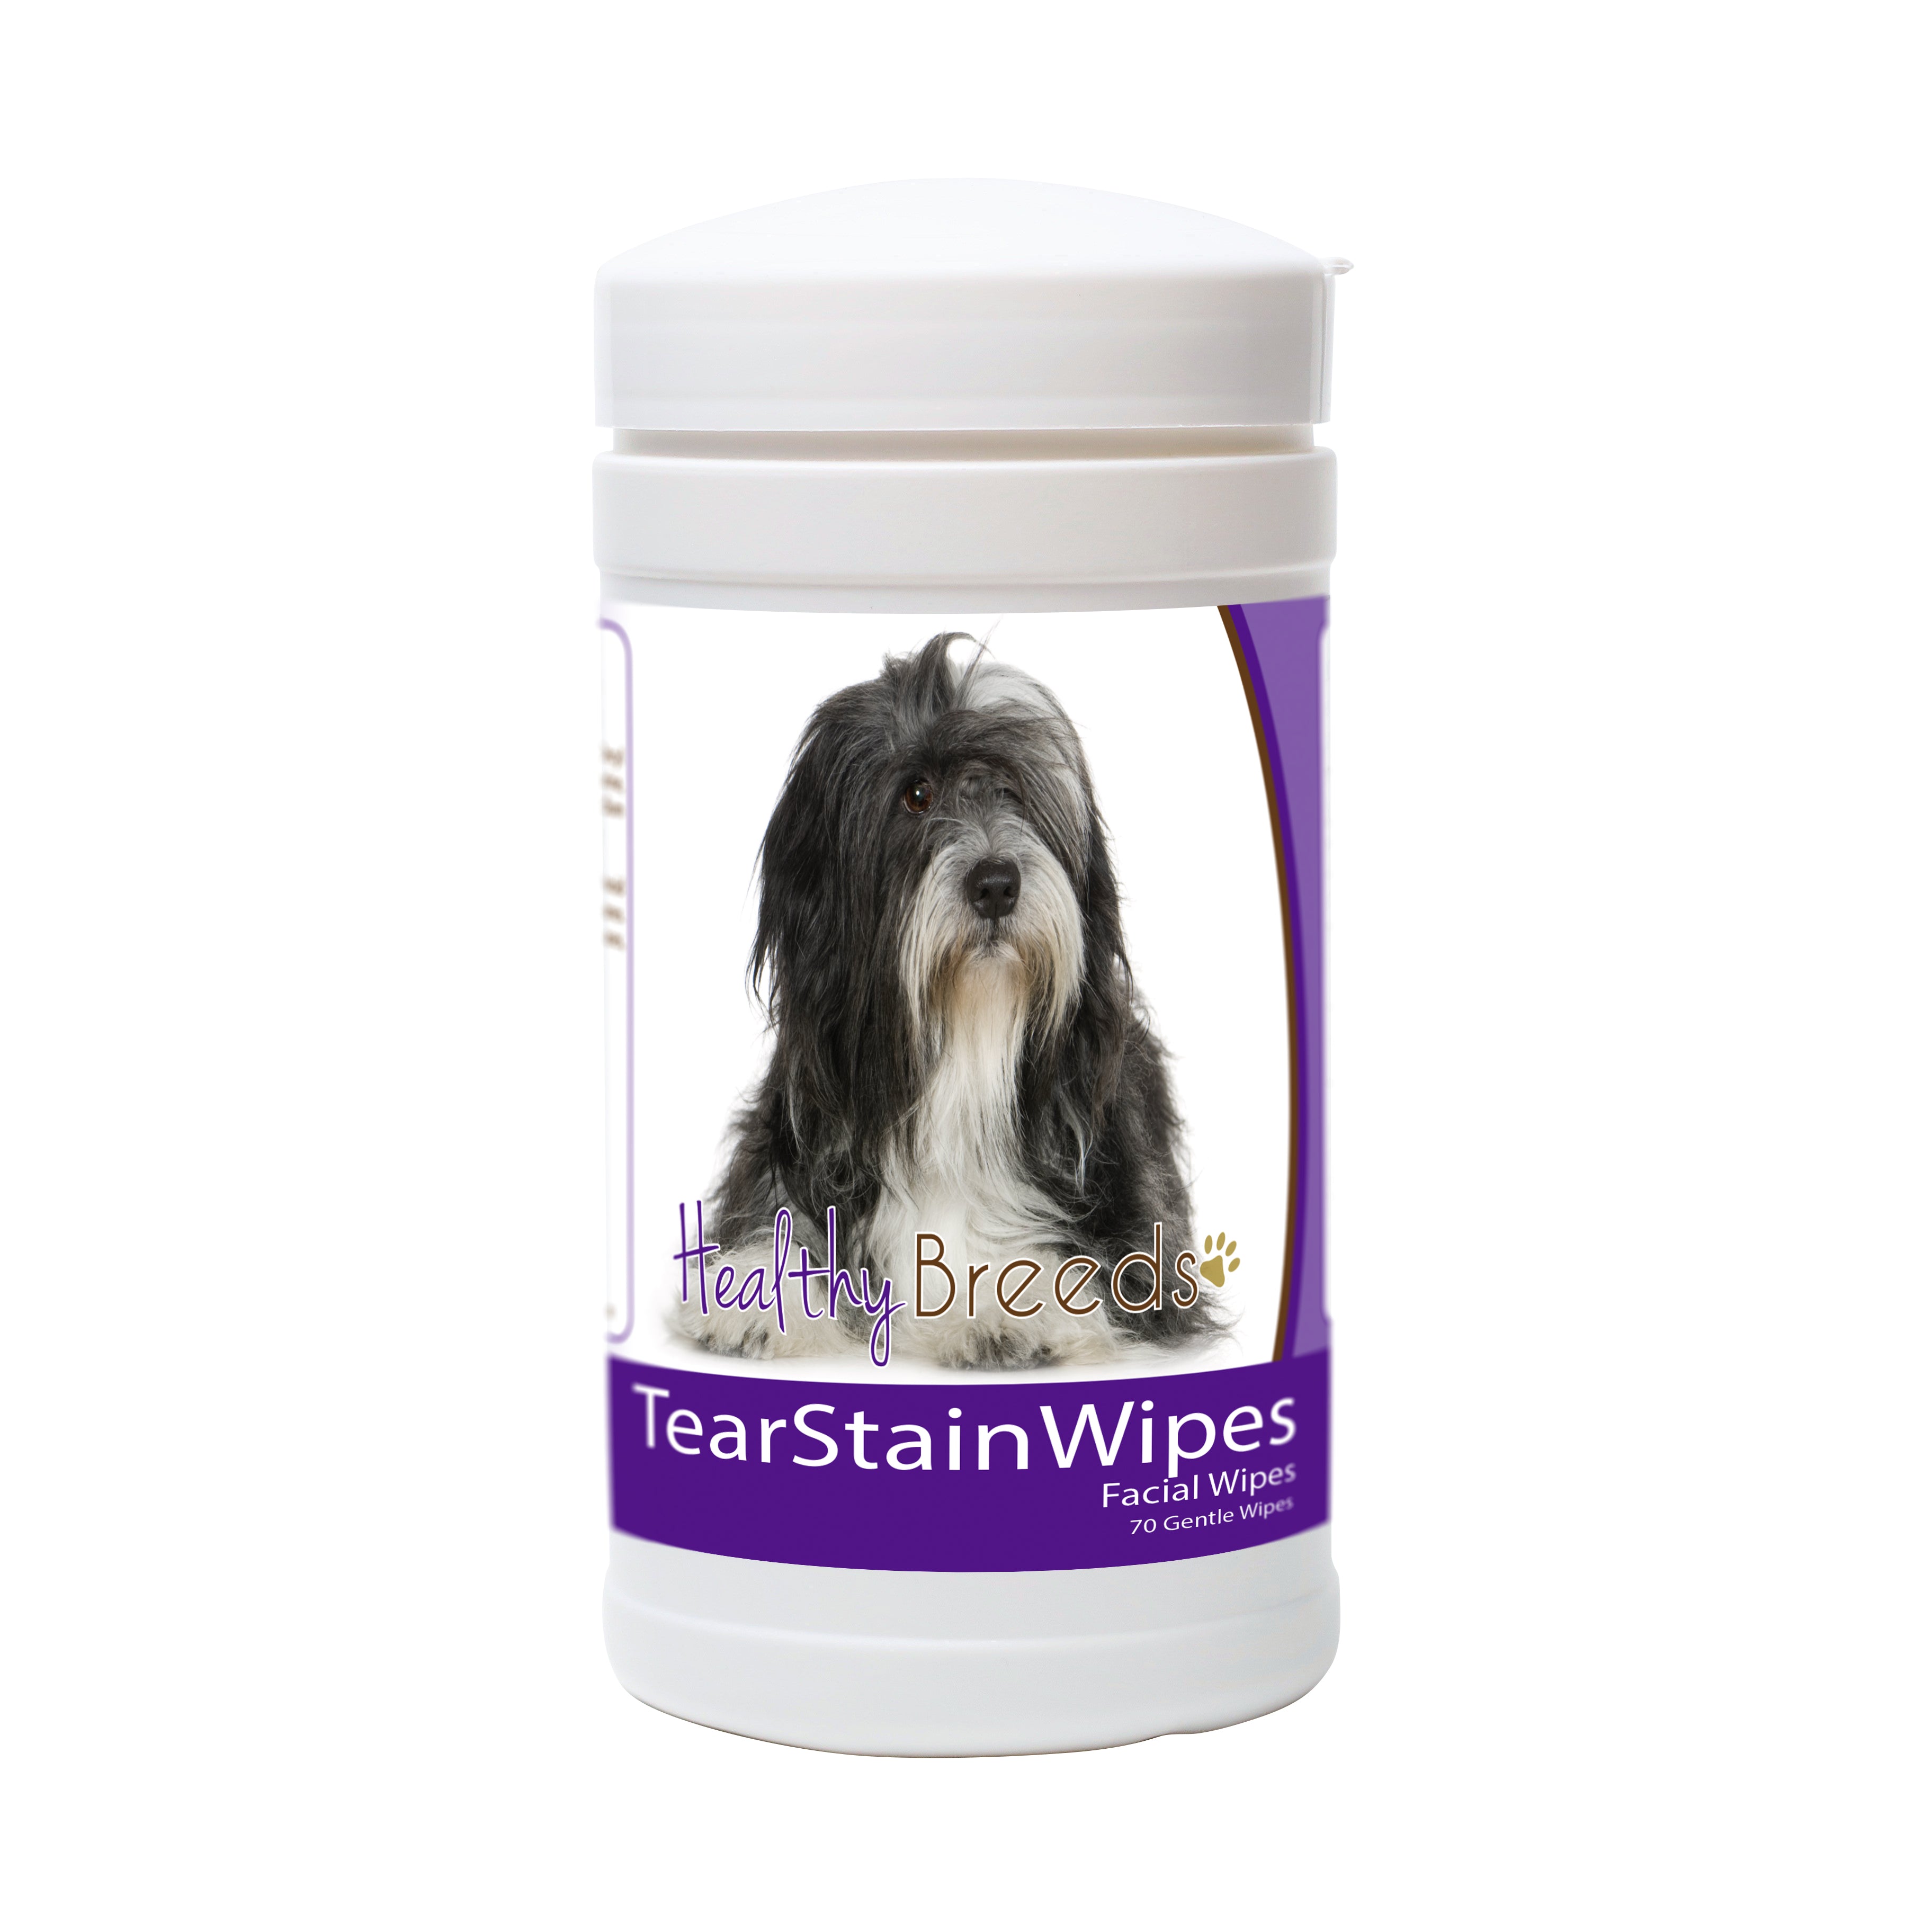 Lhasa Apso Tear Stain Wipes 70 Count